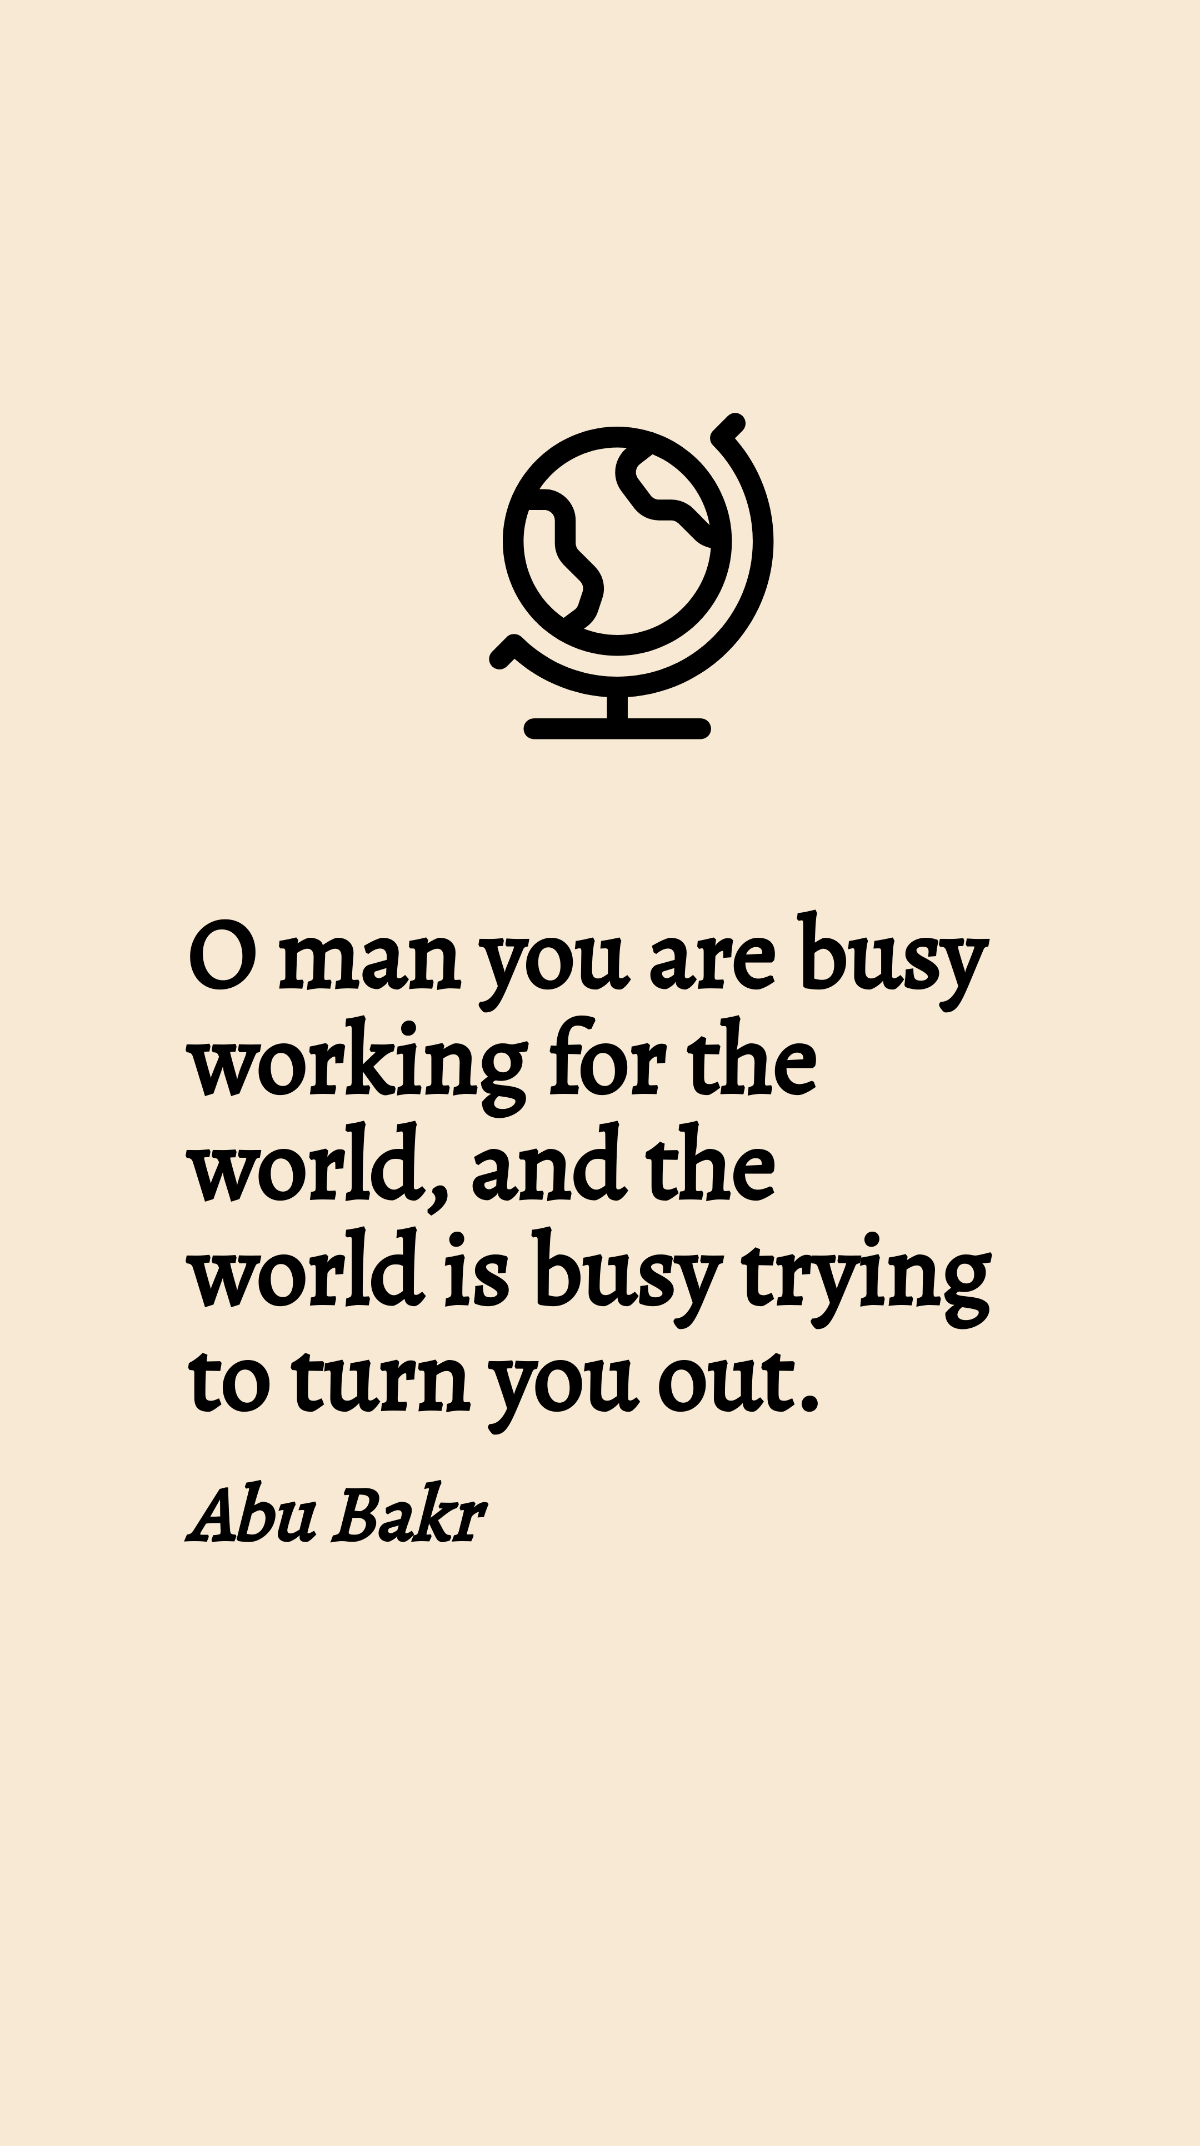 Abu Bakr - O man you are busy working for the world, and the world is busy trying to turn you out. Template